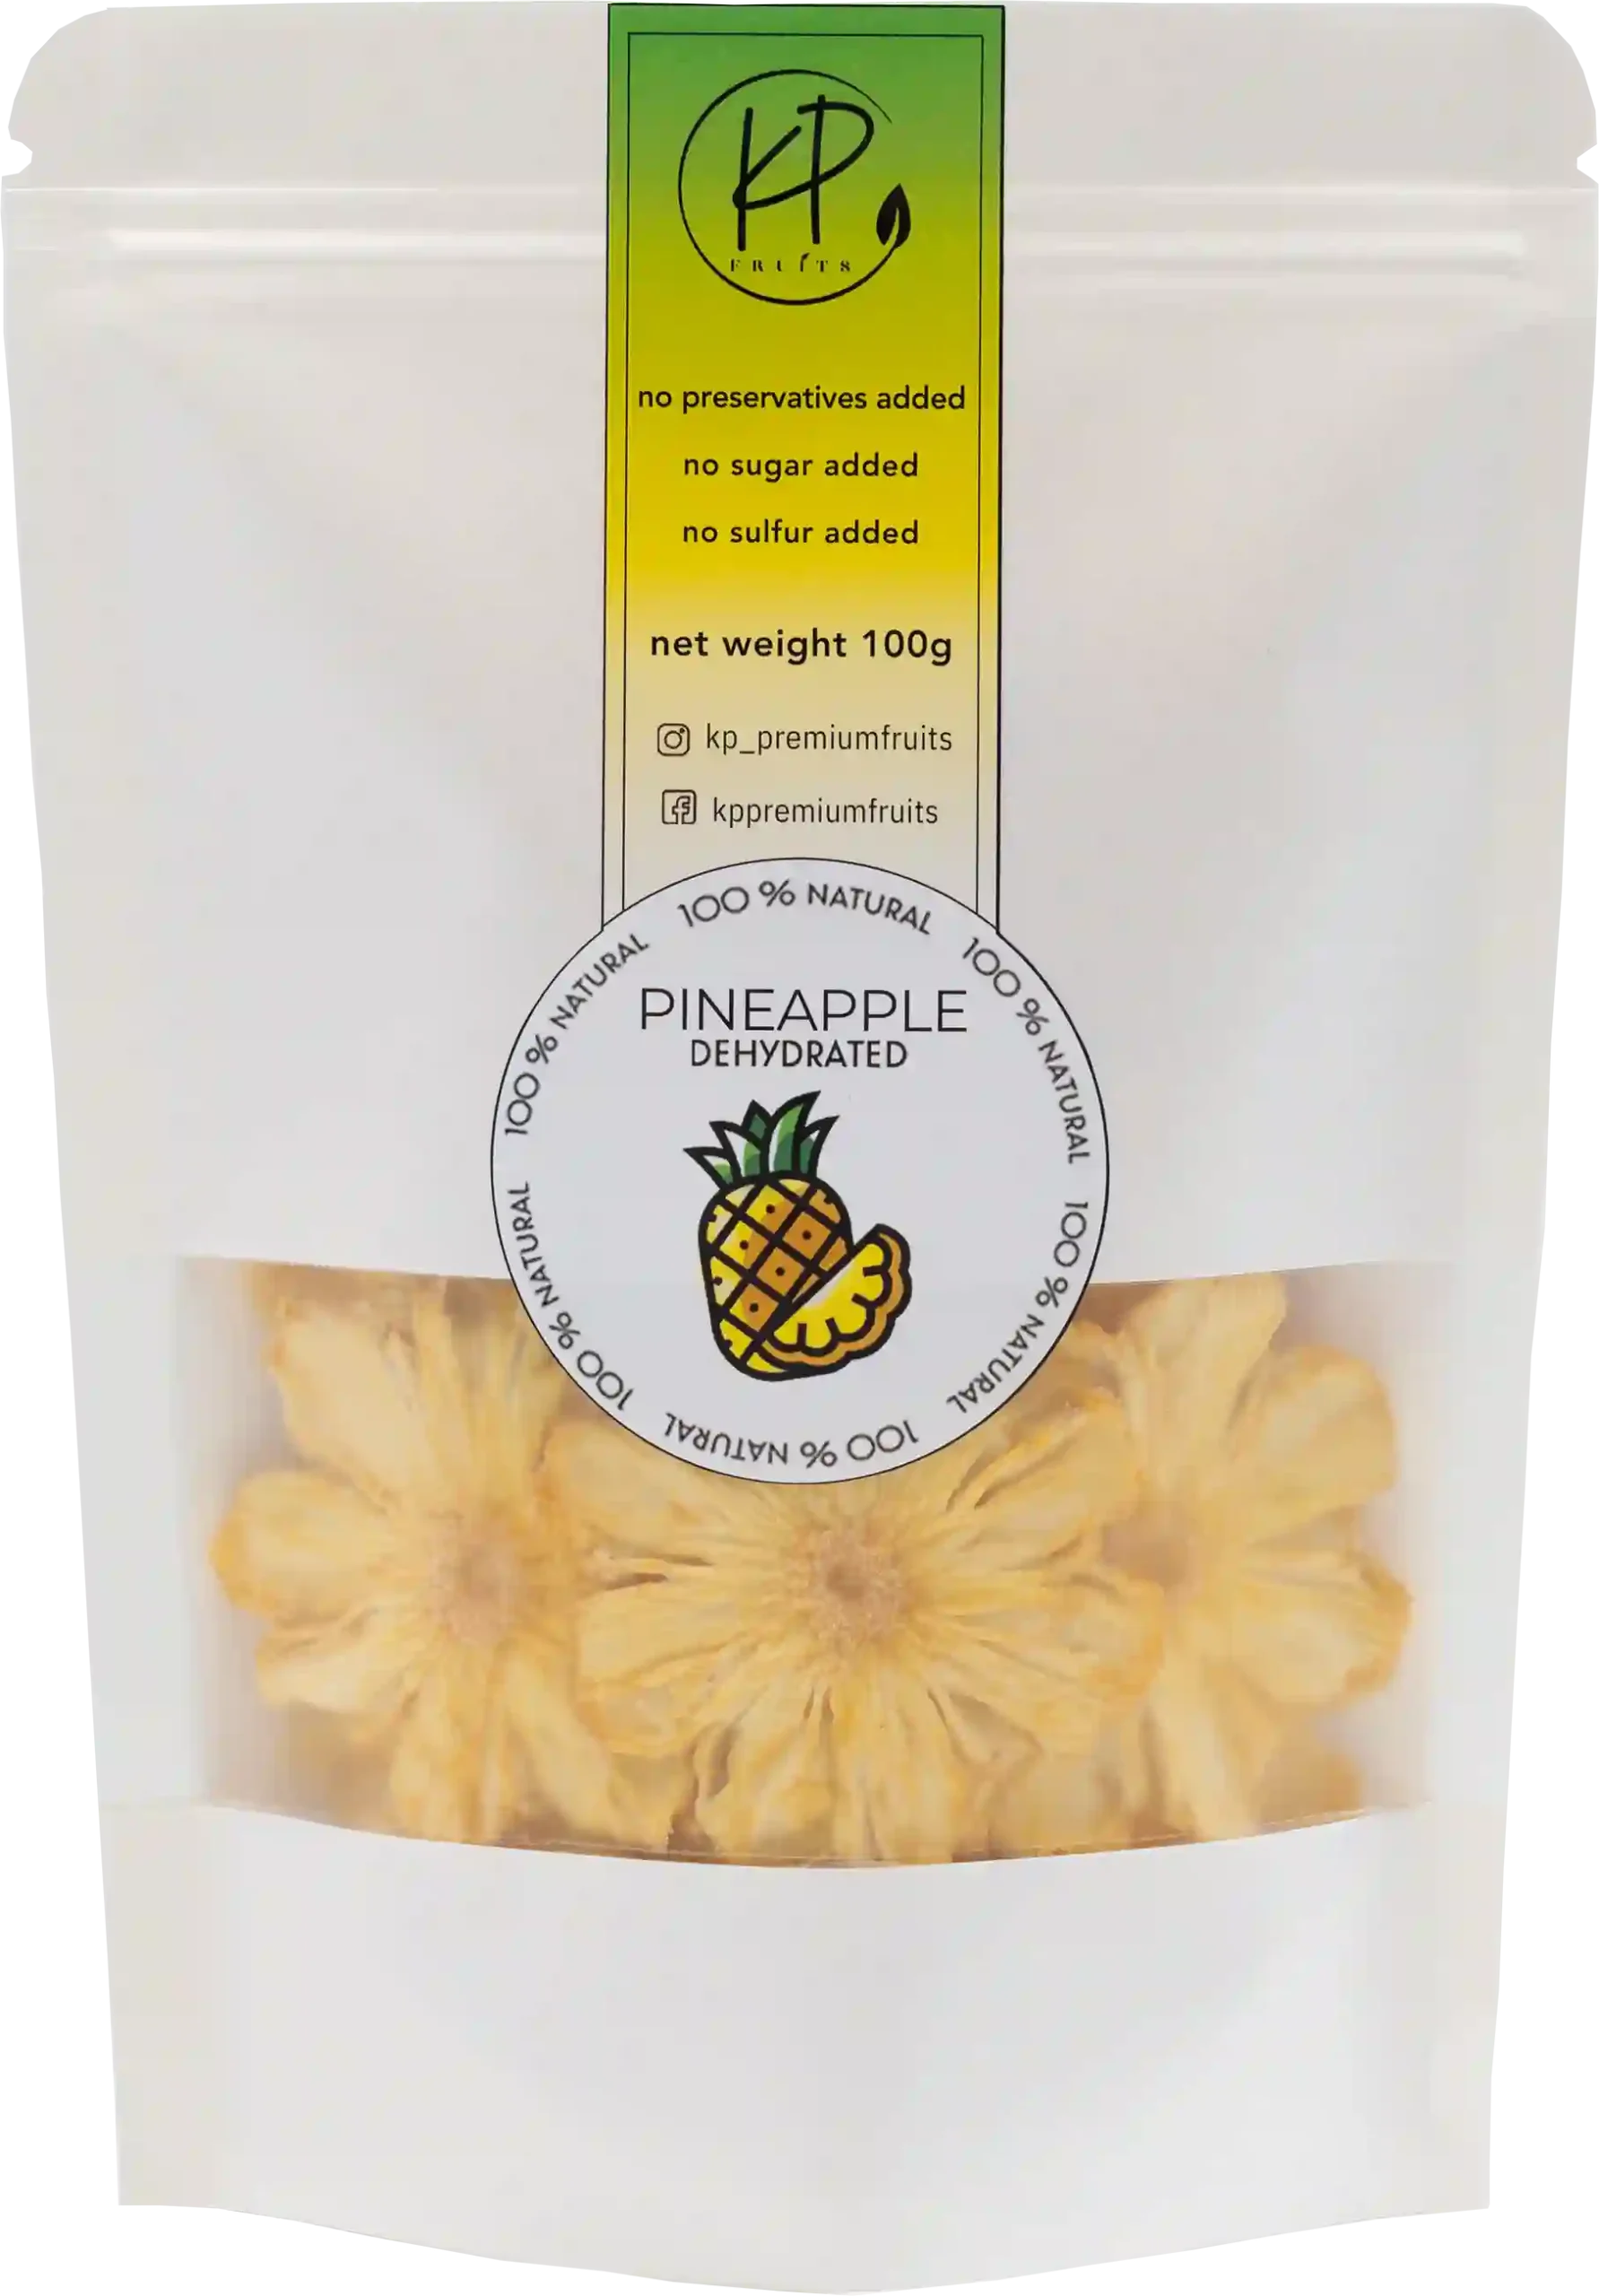 dried pineapple is a delightful snack, preserving the sweet and tropical essence of pineapple in a convenient, chewy form.